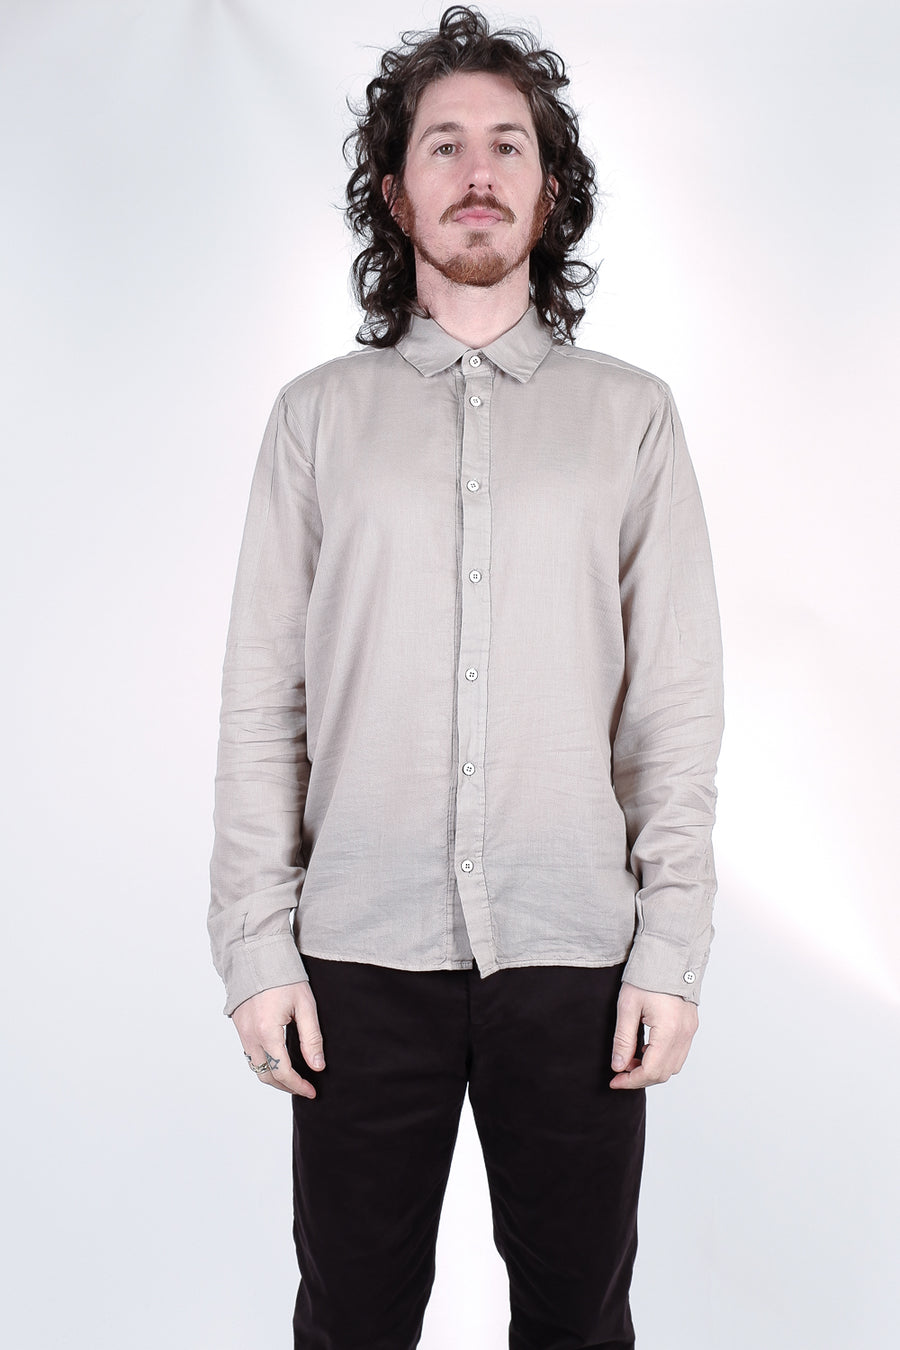 Buy the Transit Wool/Cashmere Regular Fit Shirt in Beige at Intro. Spend £50 for free UK delivery. Official stockists. We ship worldwide.